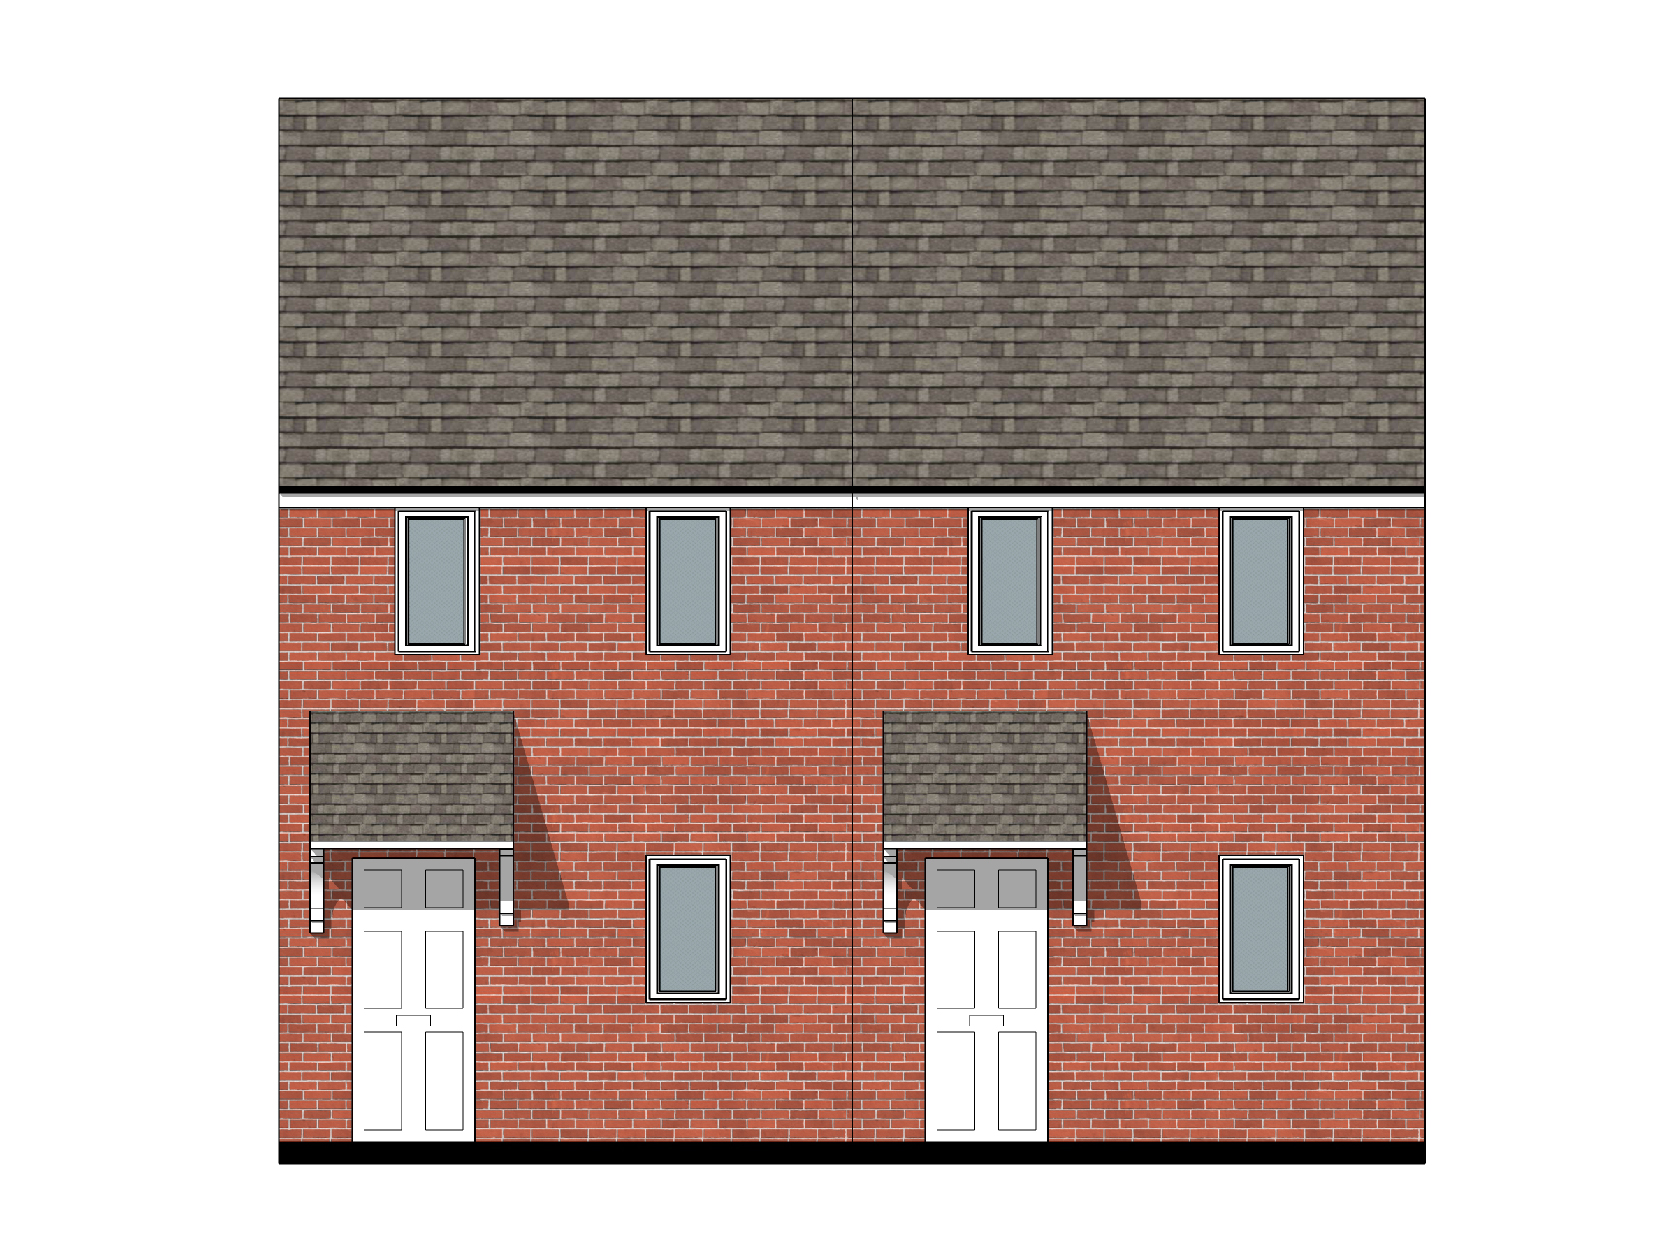 Typical elevation for a two bedroom house